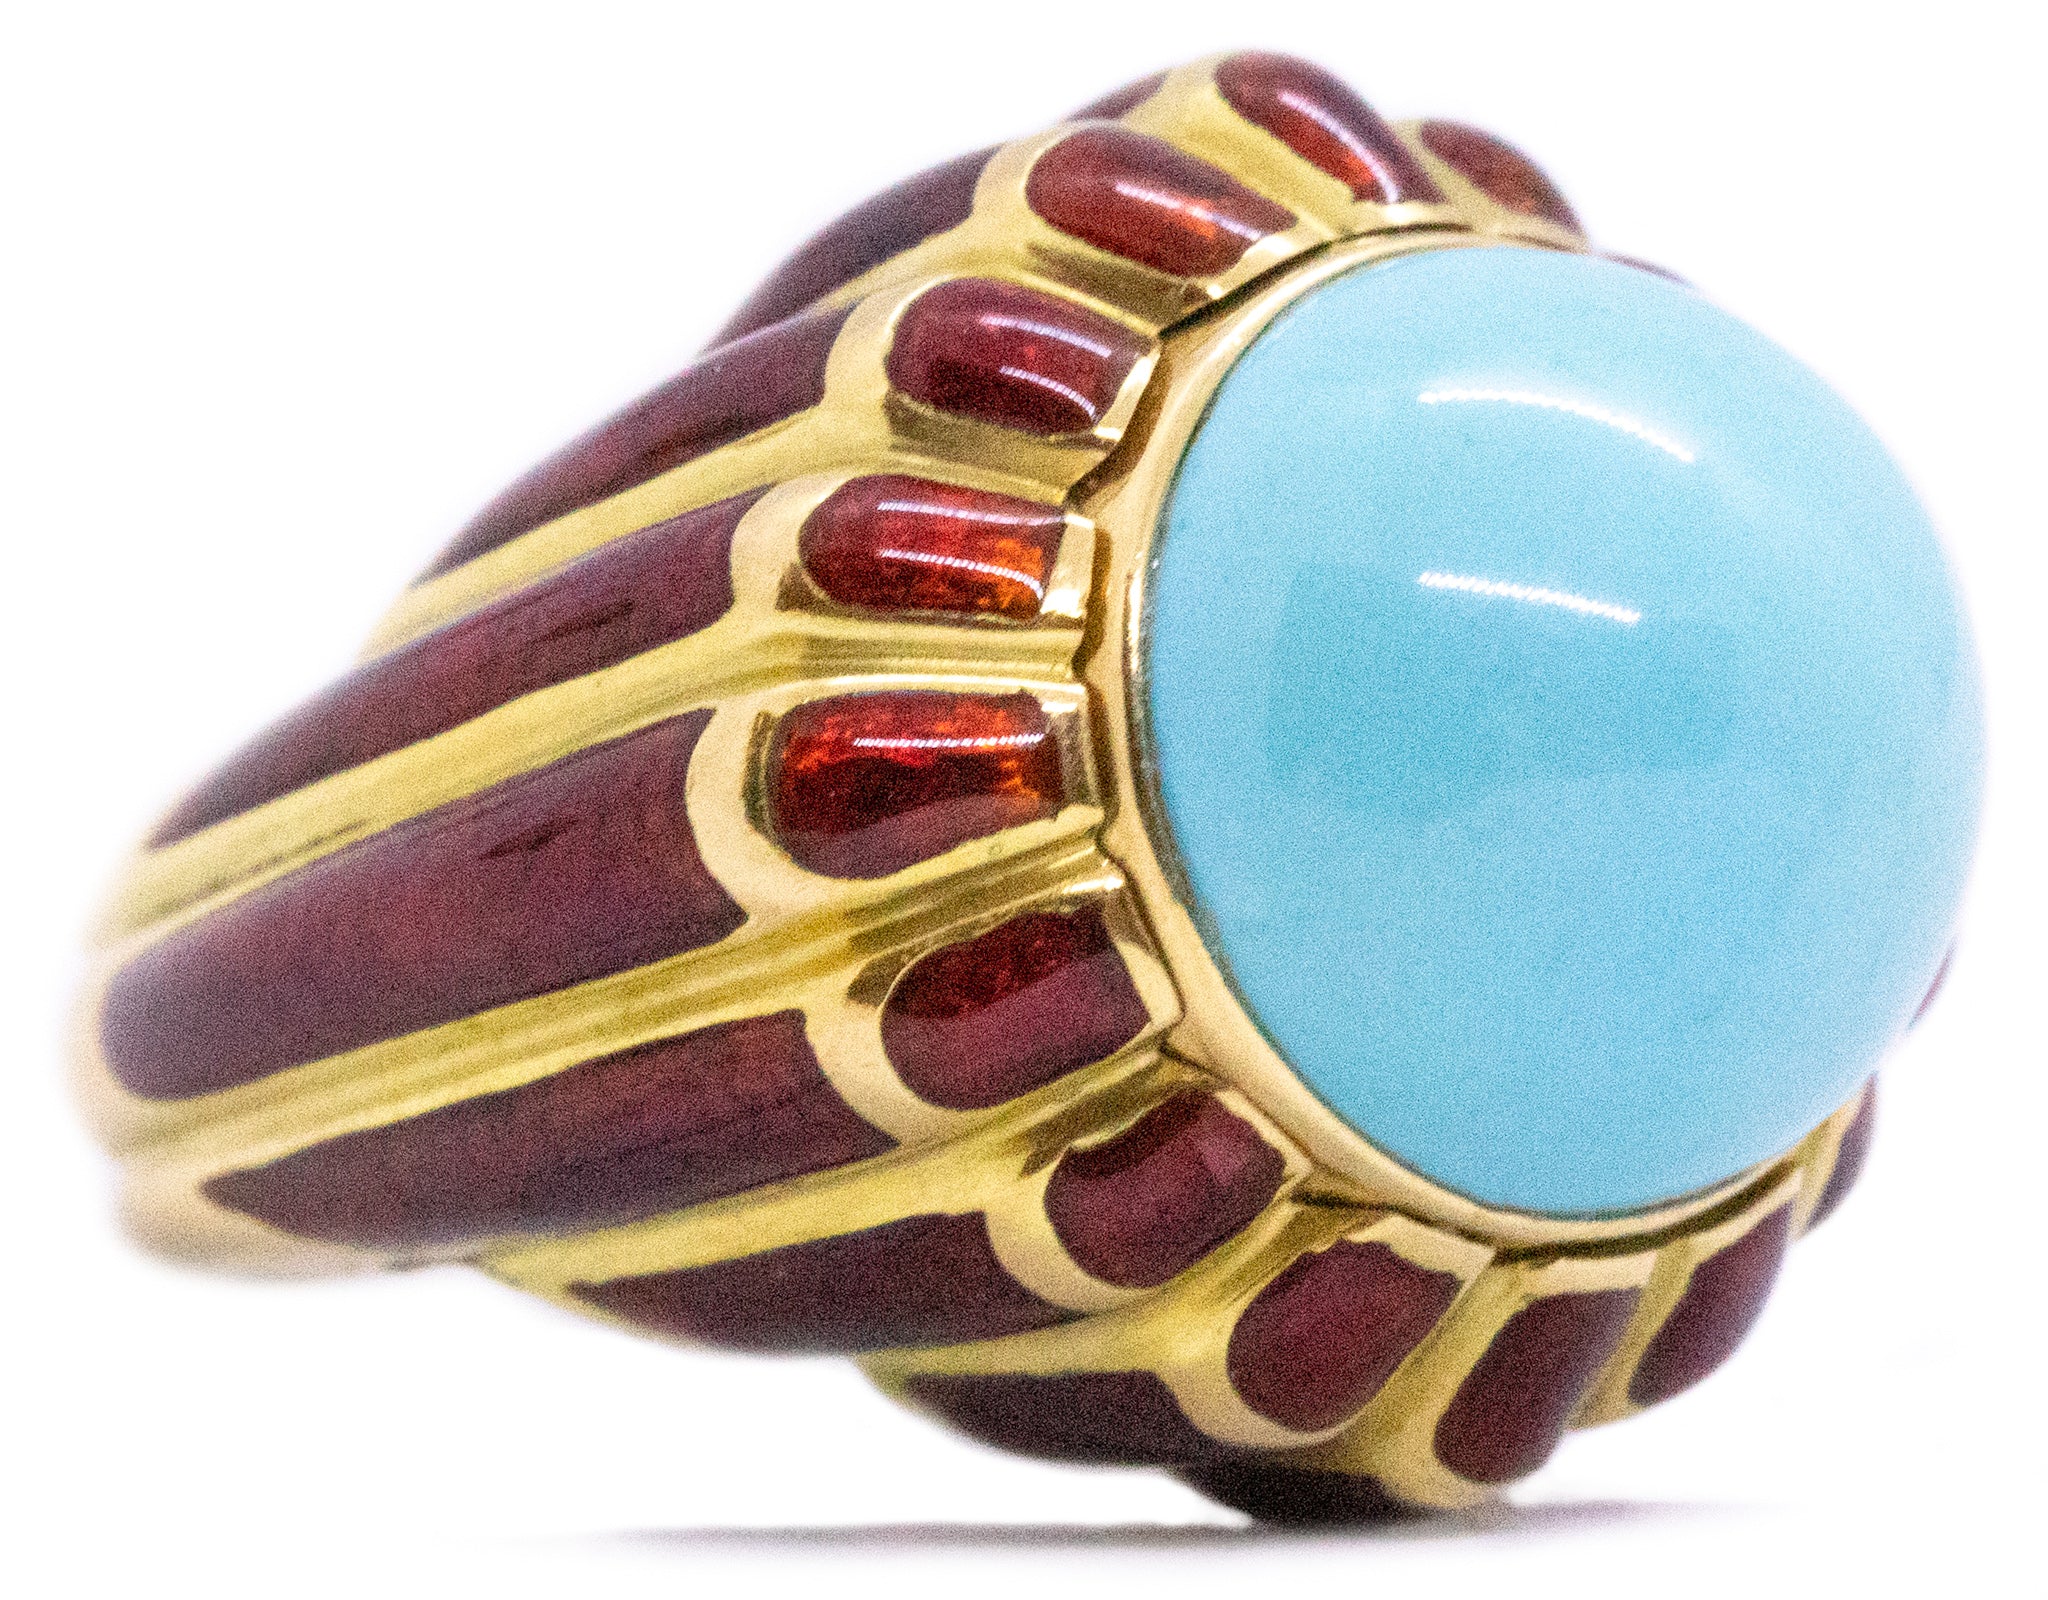 *David Webb 1970 New York Enameled cocktail ring in 18 kt gold with 35 cts Sleeping Beauty Turquoise